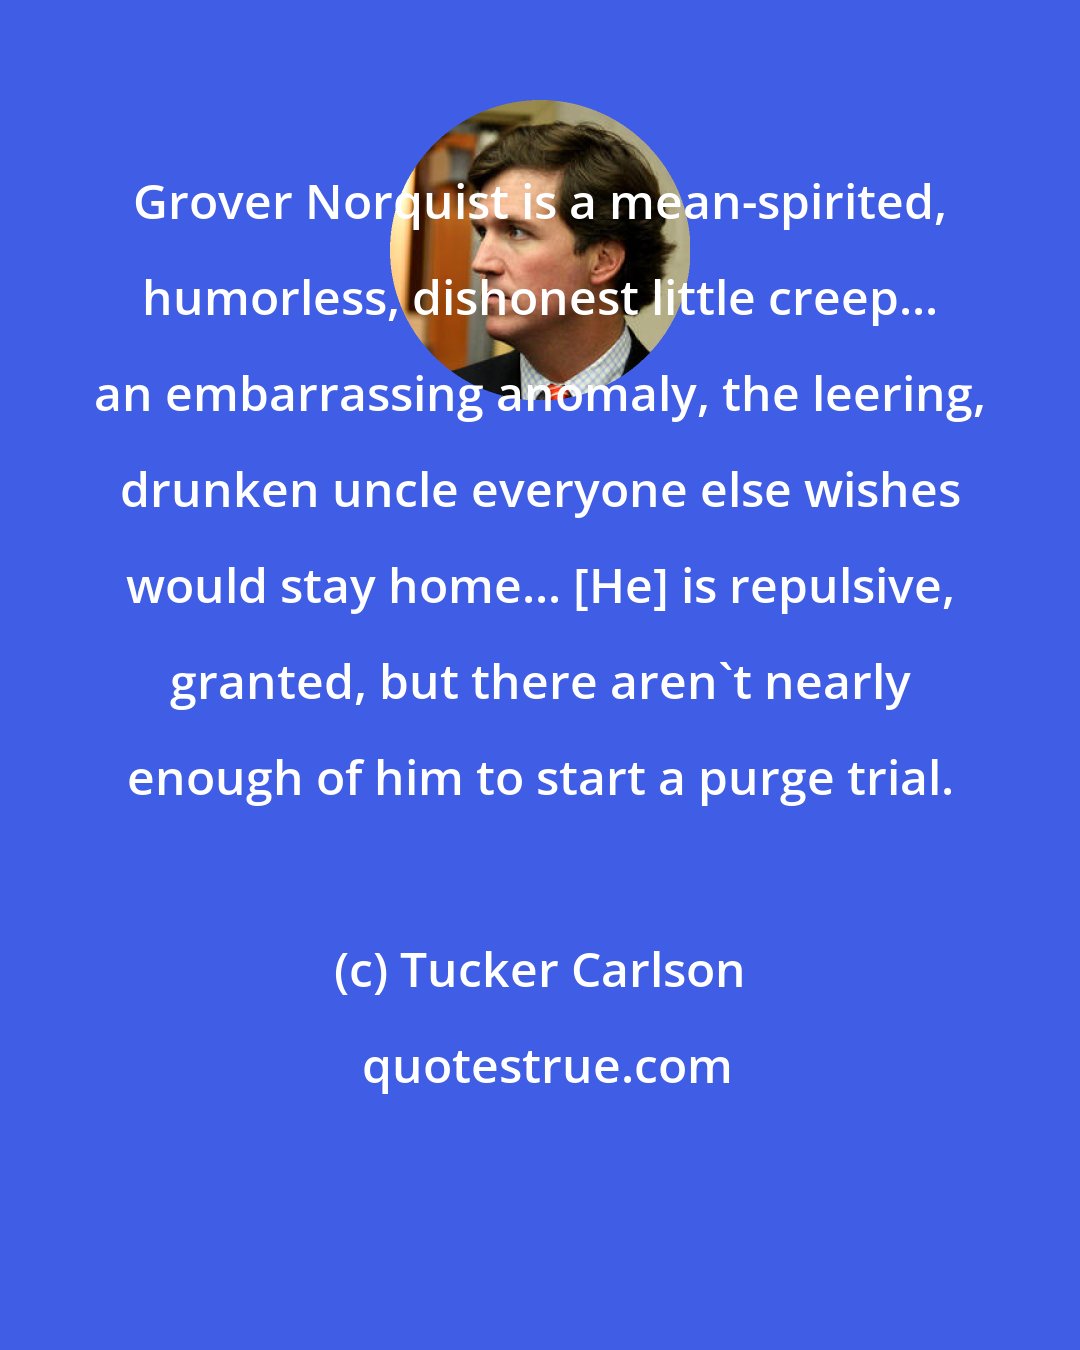 Tucker Carlson: Grover Norquist is a mean-spirited, humorless, dishonest little creep... an embarrassing anomaly, the leering, drunken uncle everyone else wishes would stay home... [He] is repulsive, granted, but there aren't nearly enough of him to start a purge trial.